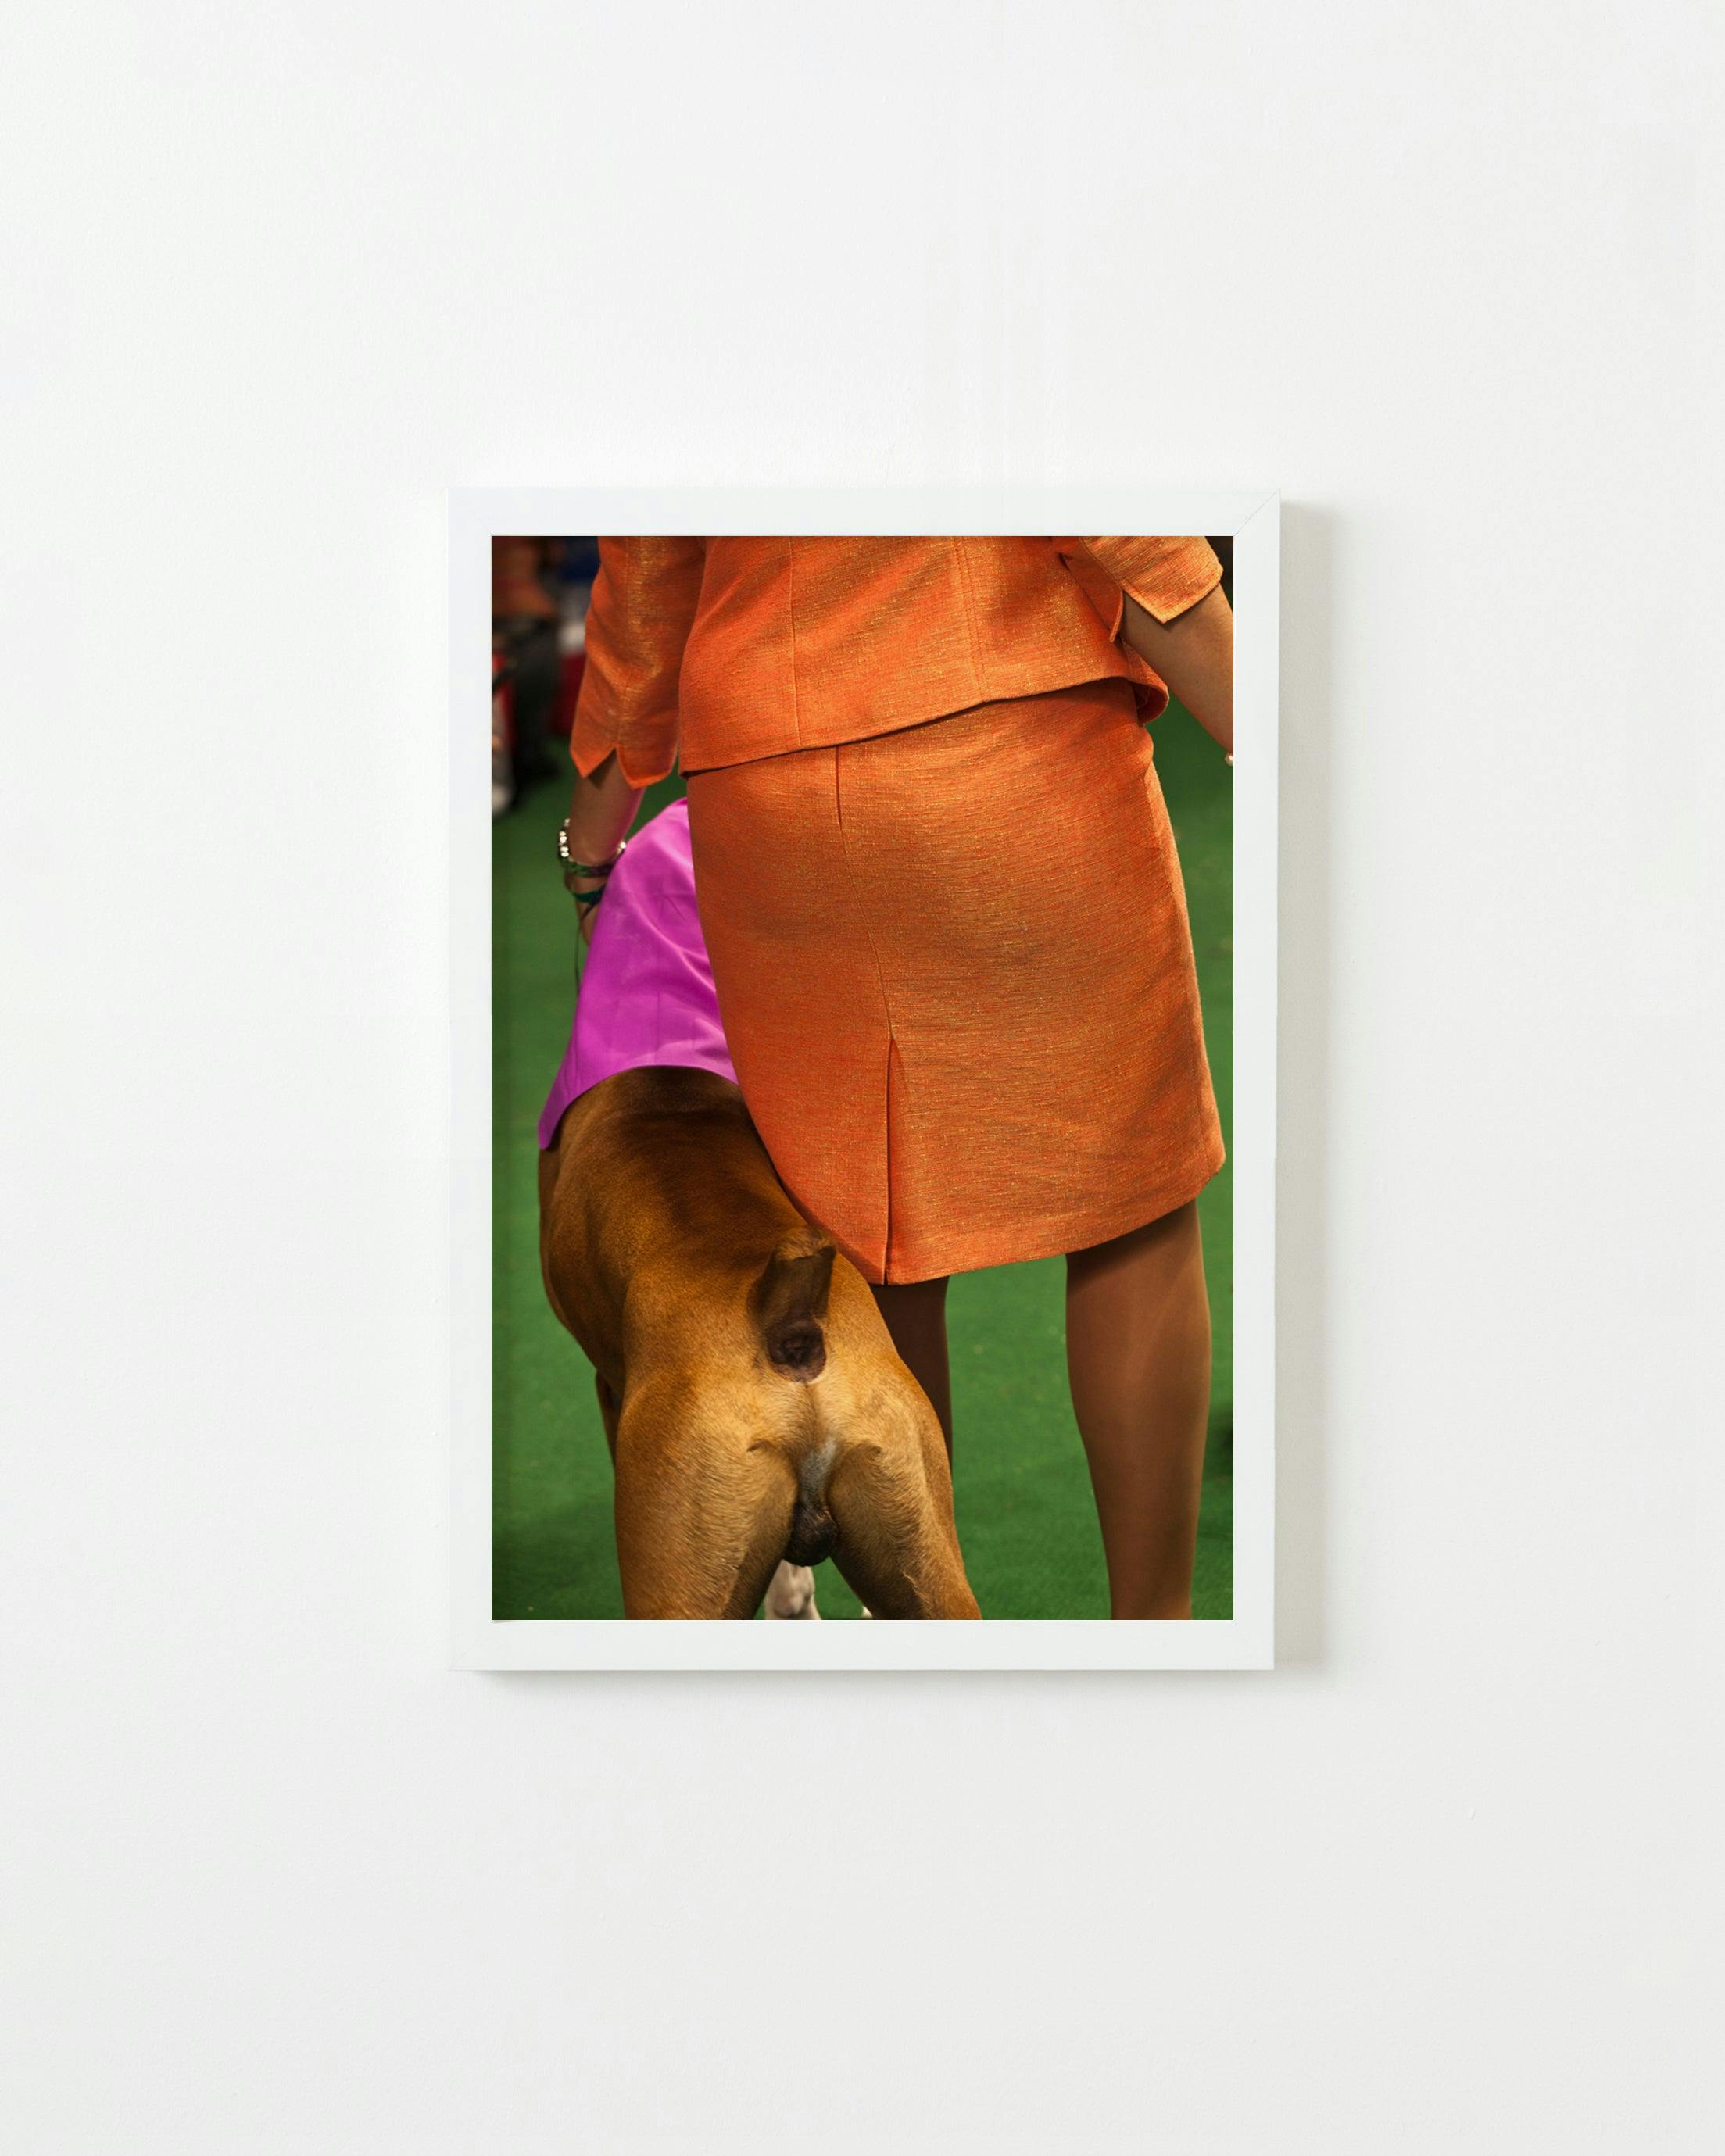 Photography by Dolly Faibyshev titled "Orange Lady and Boxer".